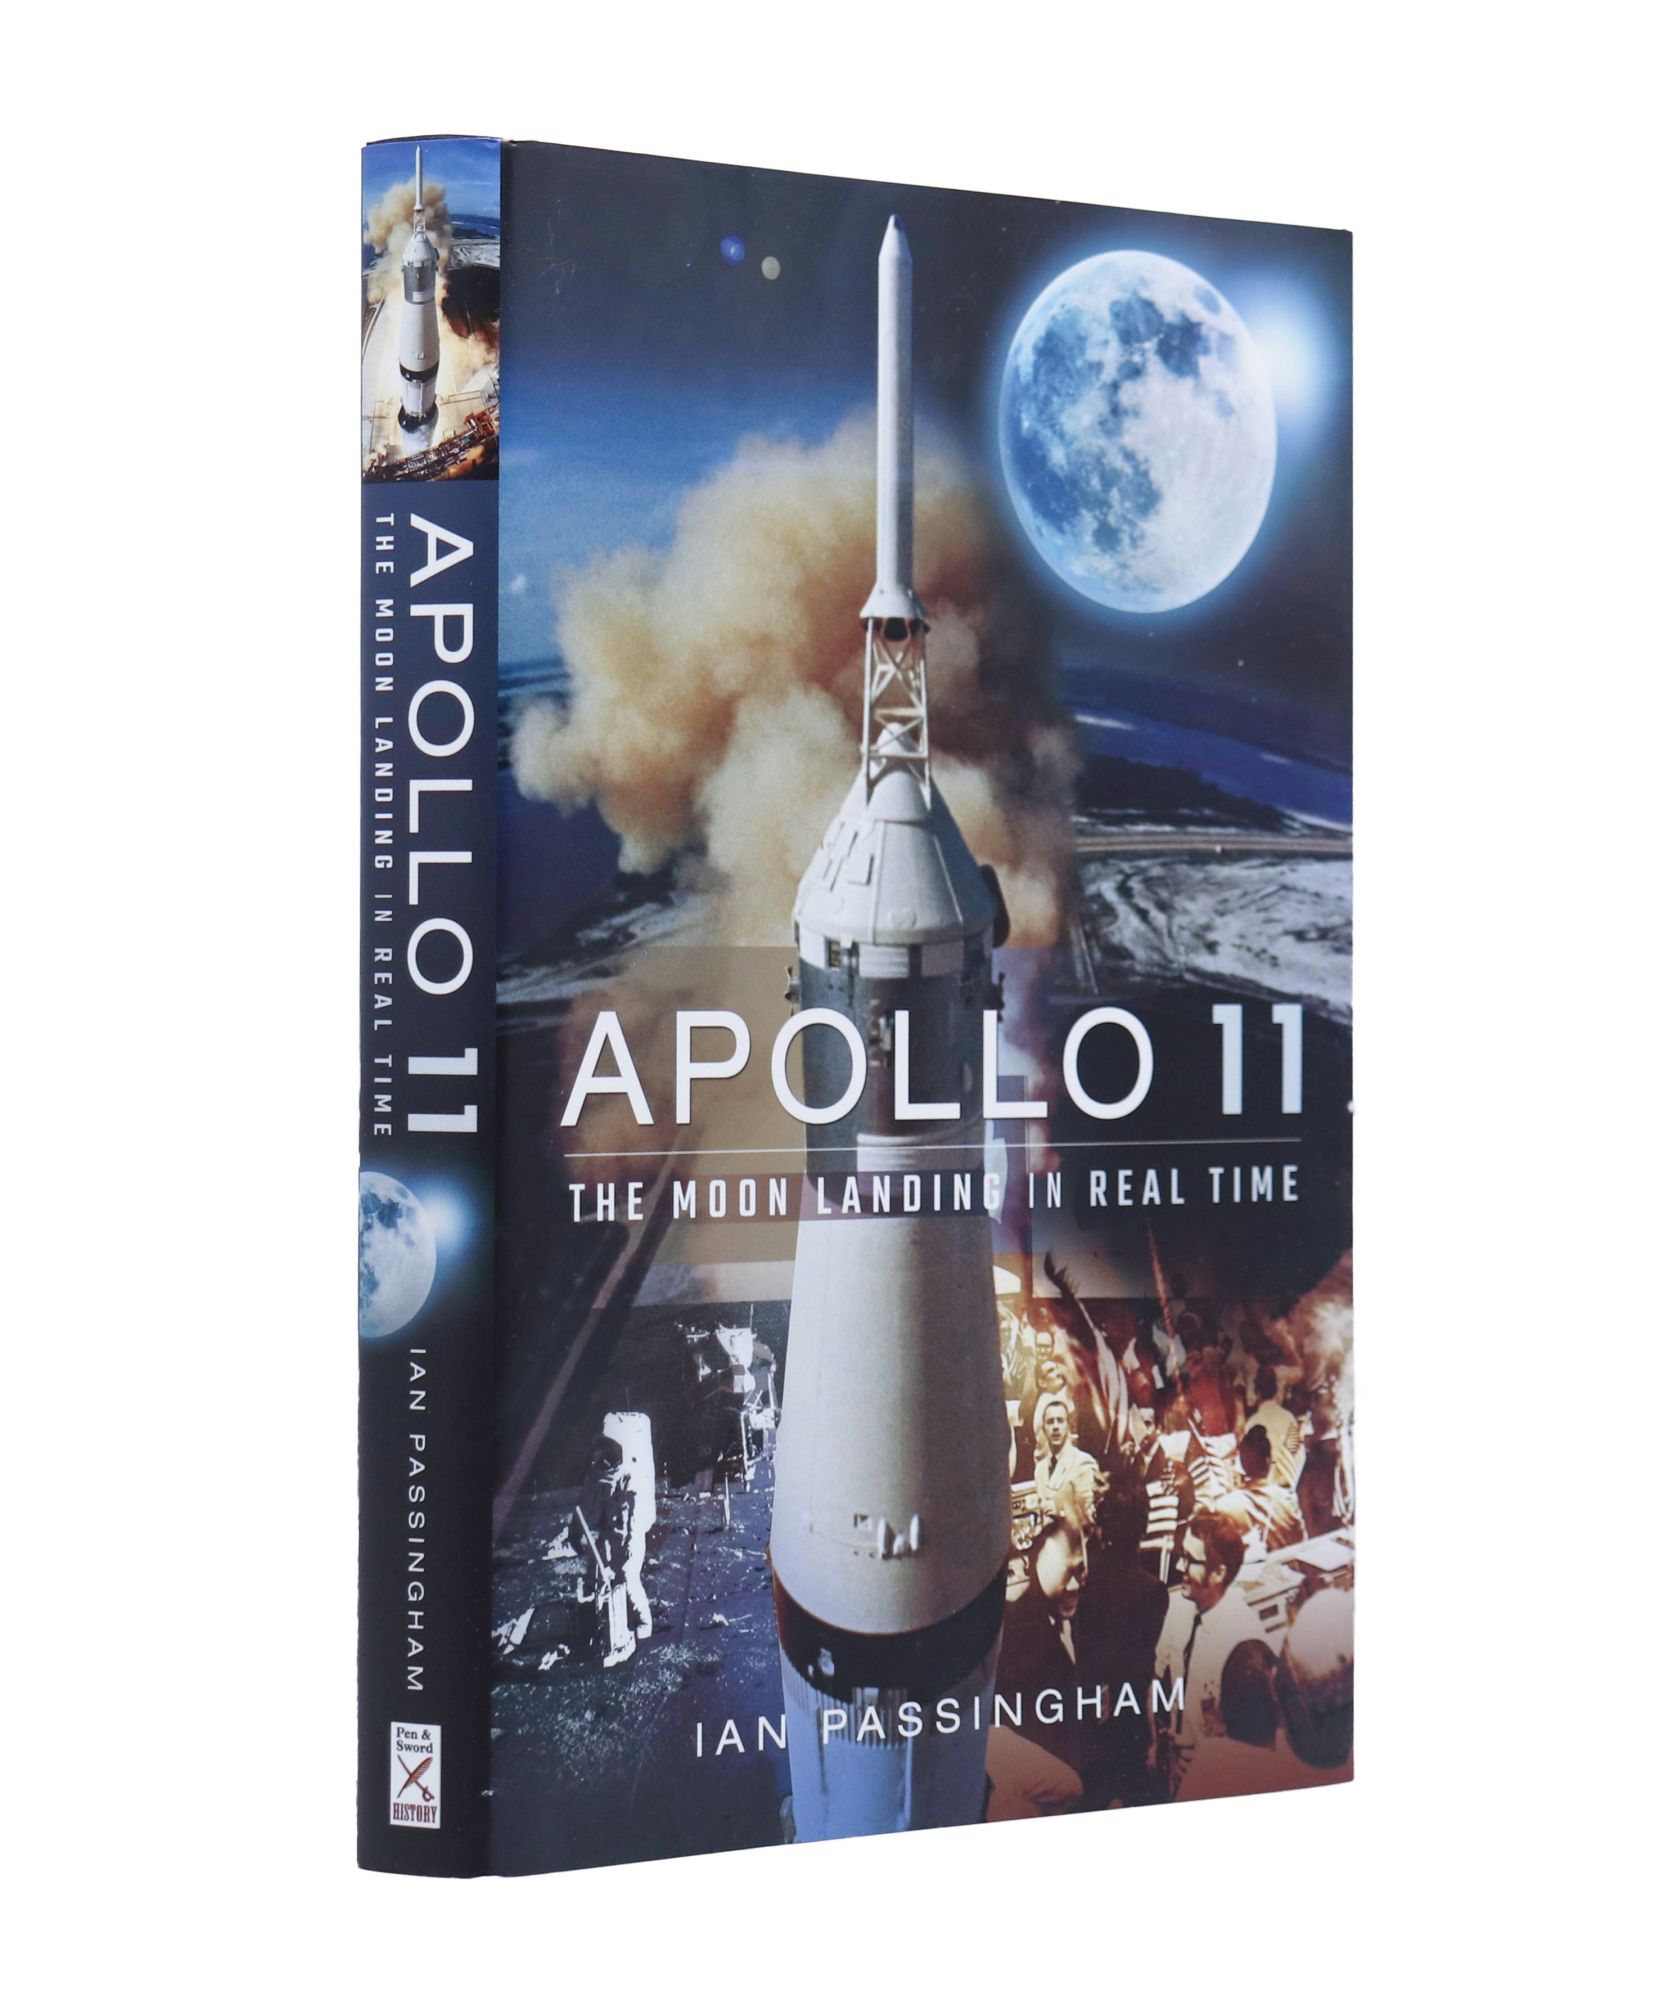 Apollo 11: The Moon Landing in Real Time - Ian Passingham